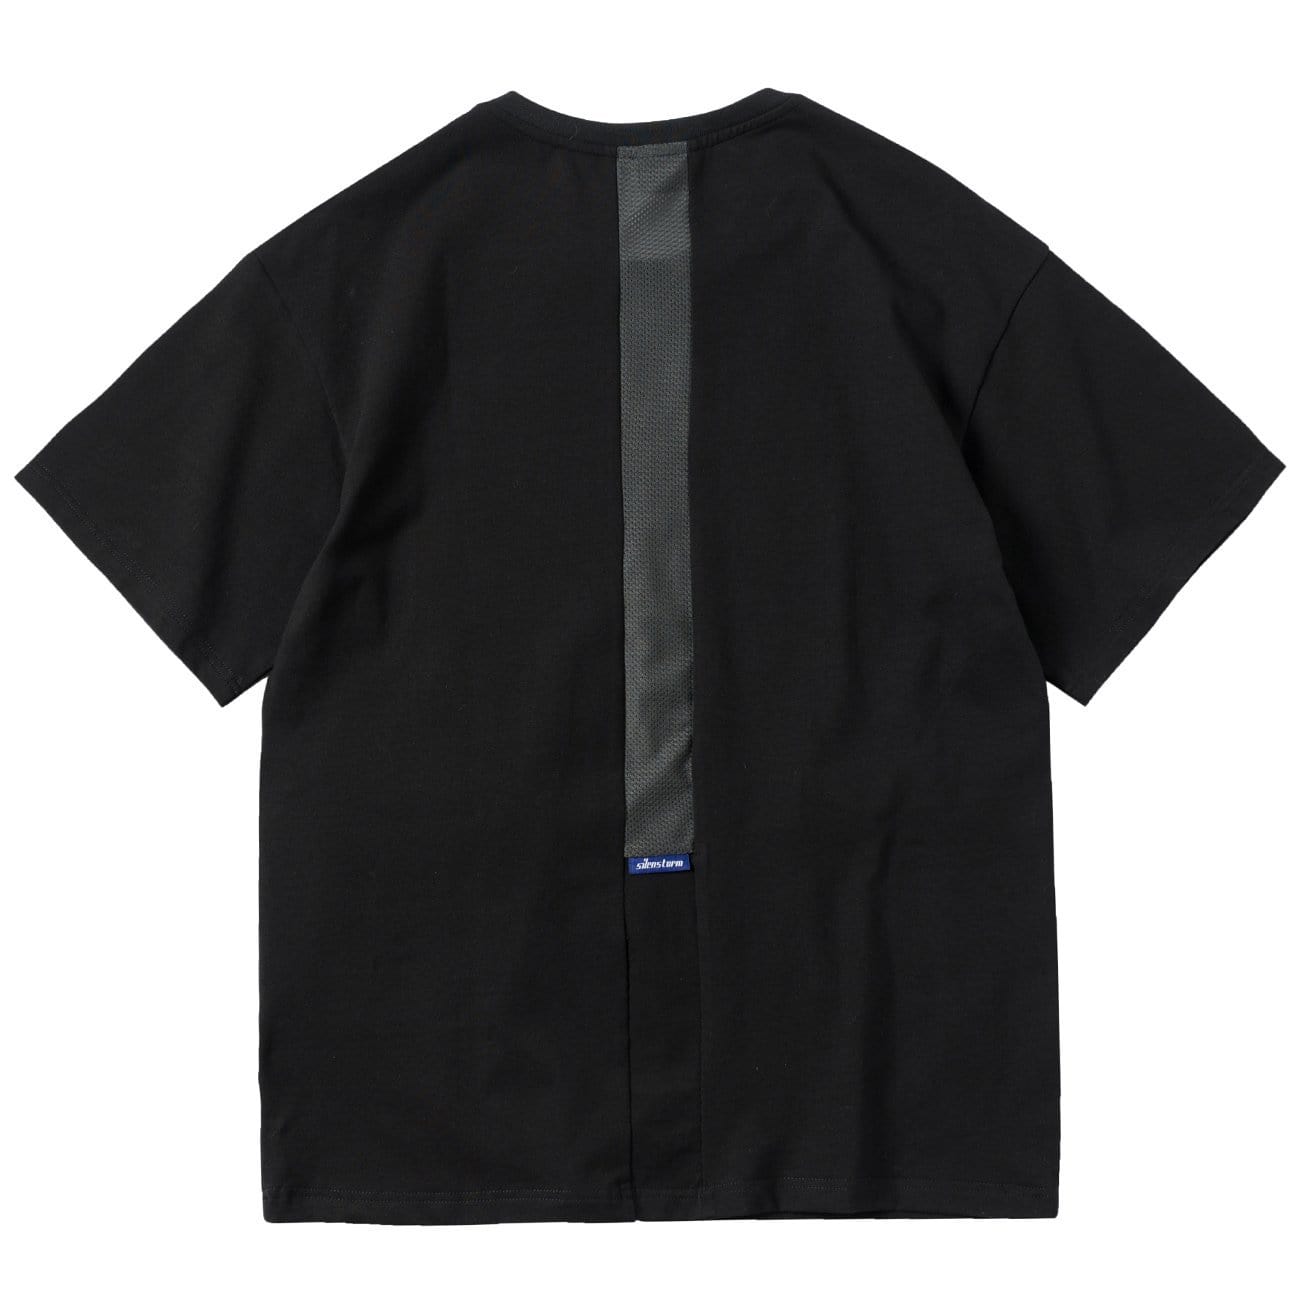 WLS Functional Multi-Pocket Cotton Tee